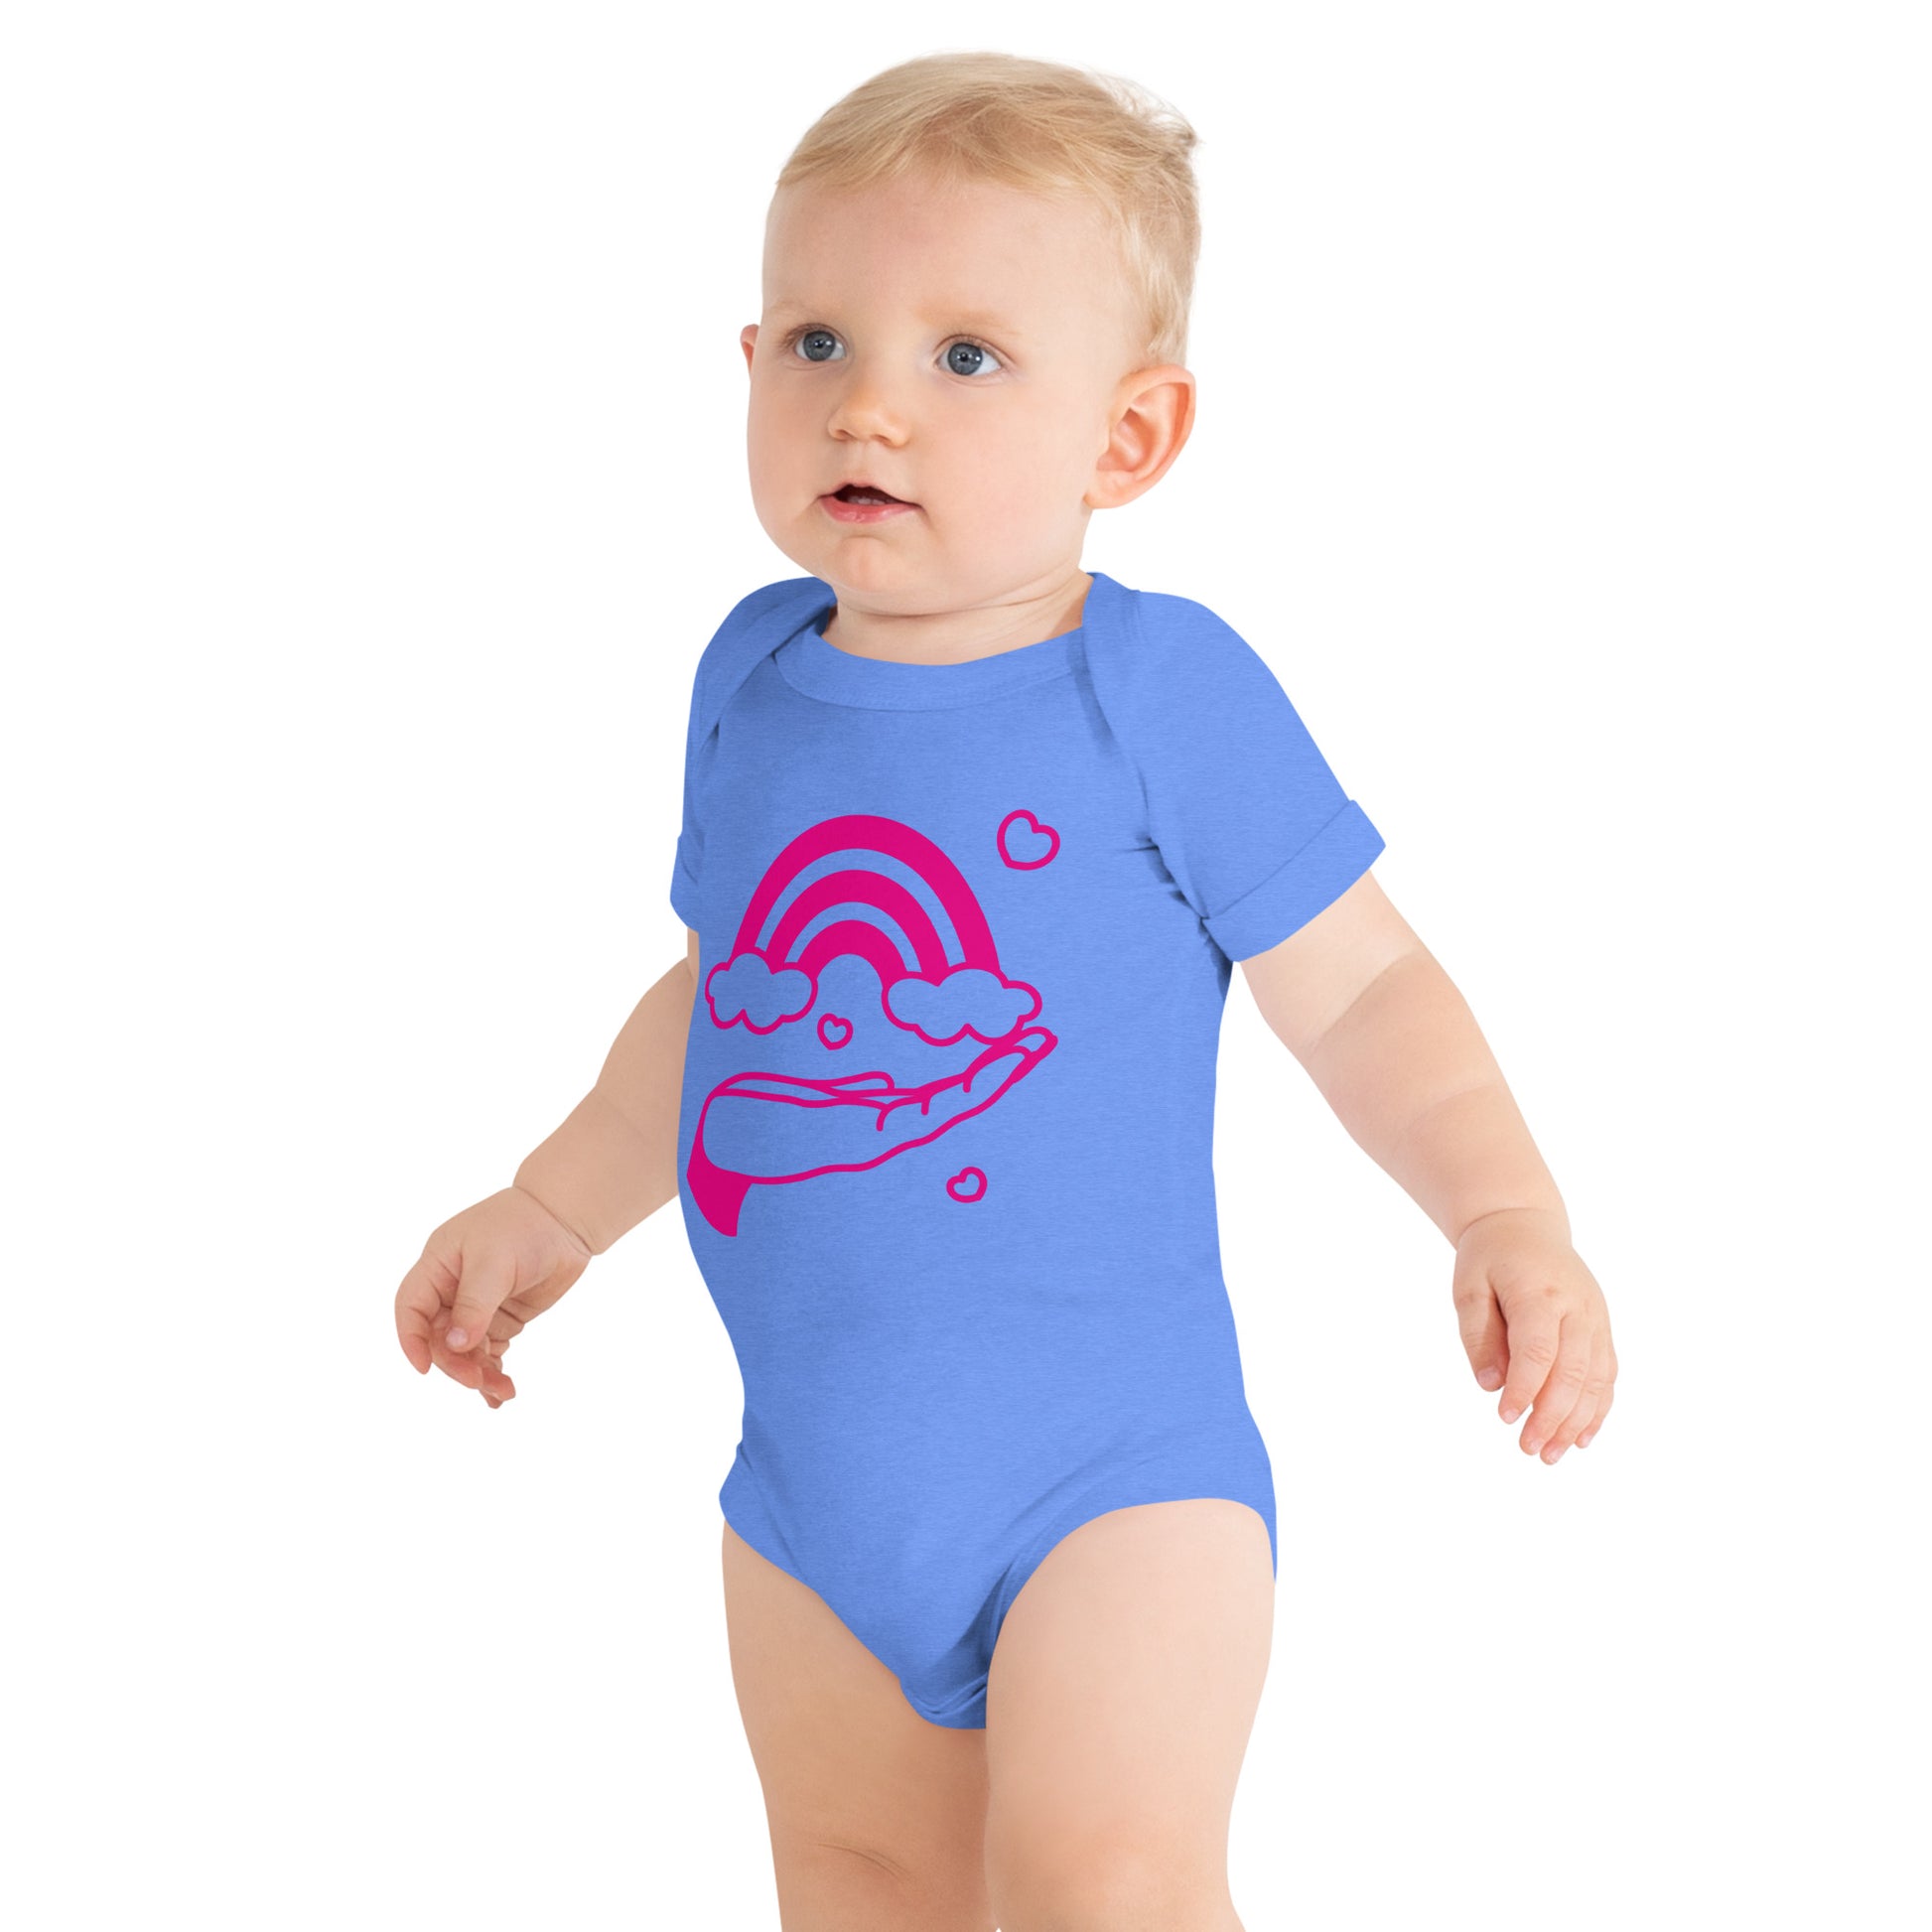 baby with columbia blue short sleeve one piece with print of pink hand holding a pink rainbow